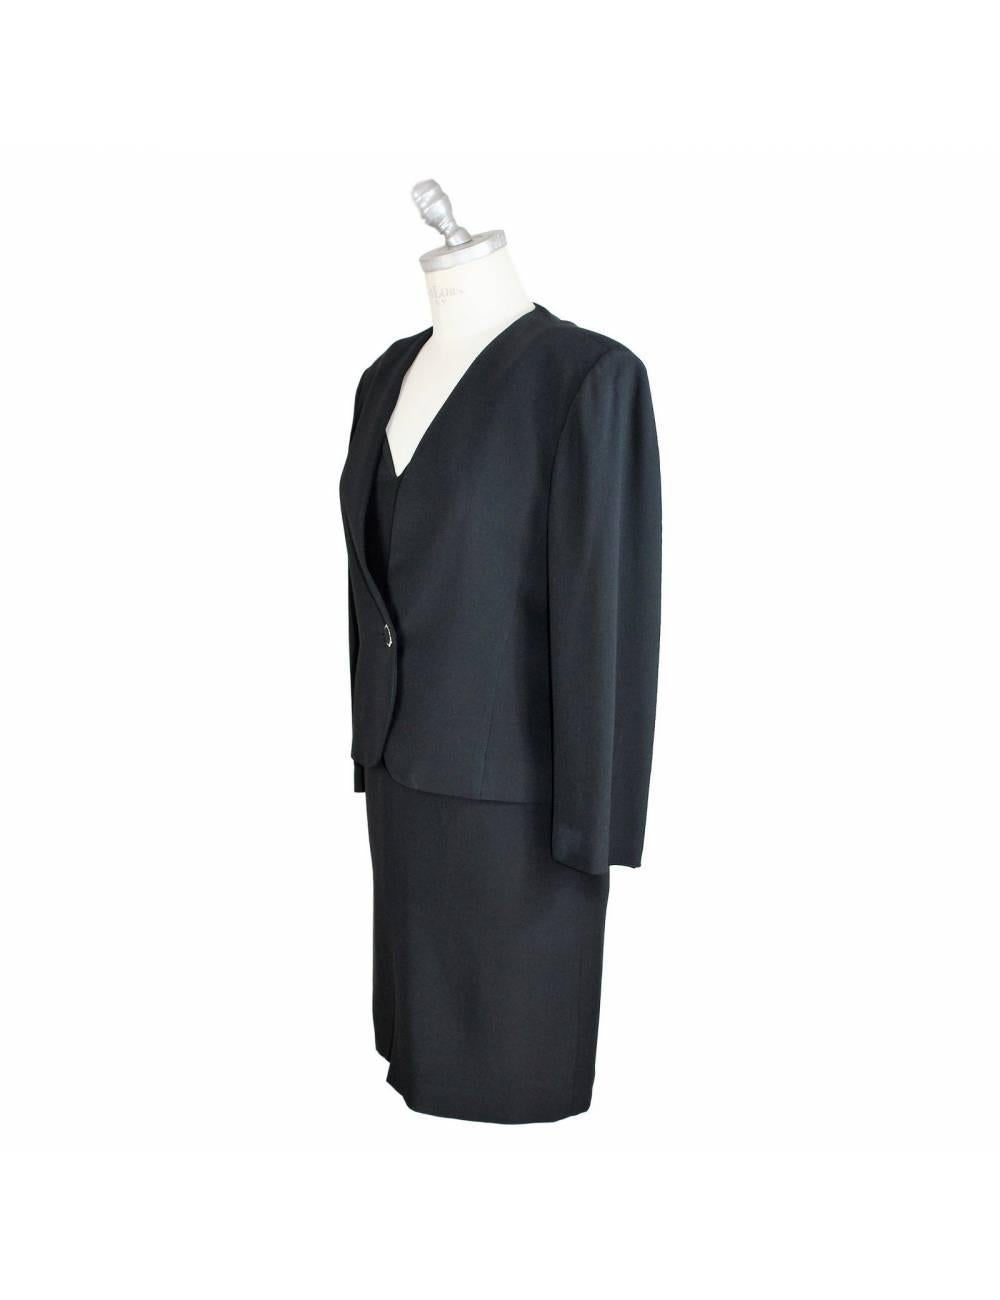 Vintage suit dress Egon Von Furstenberg brand, black, 100% viscose. The suit consists of dress and jacket, the sheath dress with shoulder pads covered with stones, the jacket closes with a jewel button. 90s. Made in Italy. Excellent vintage